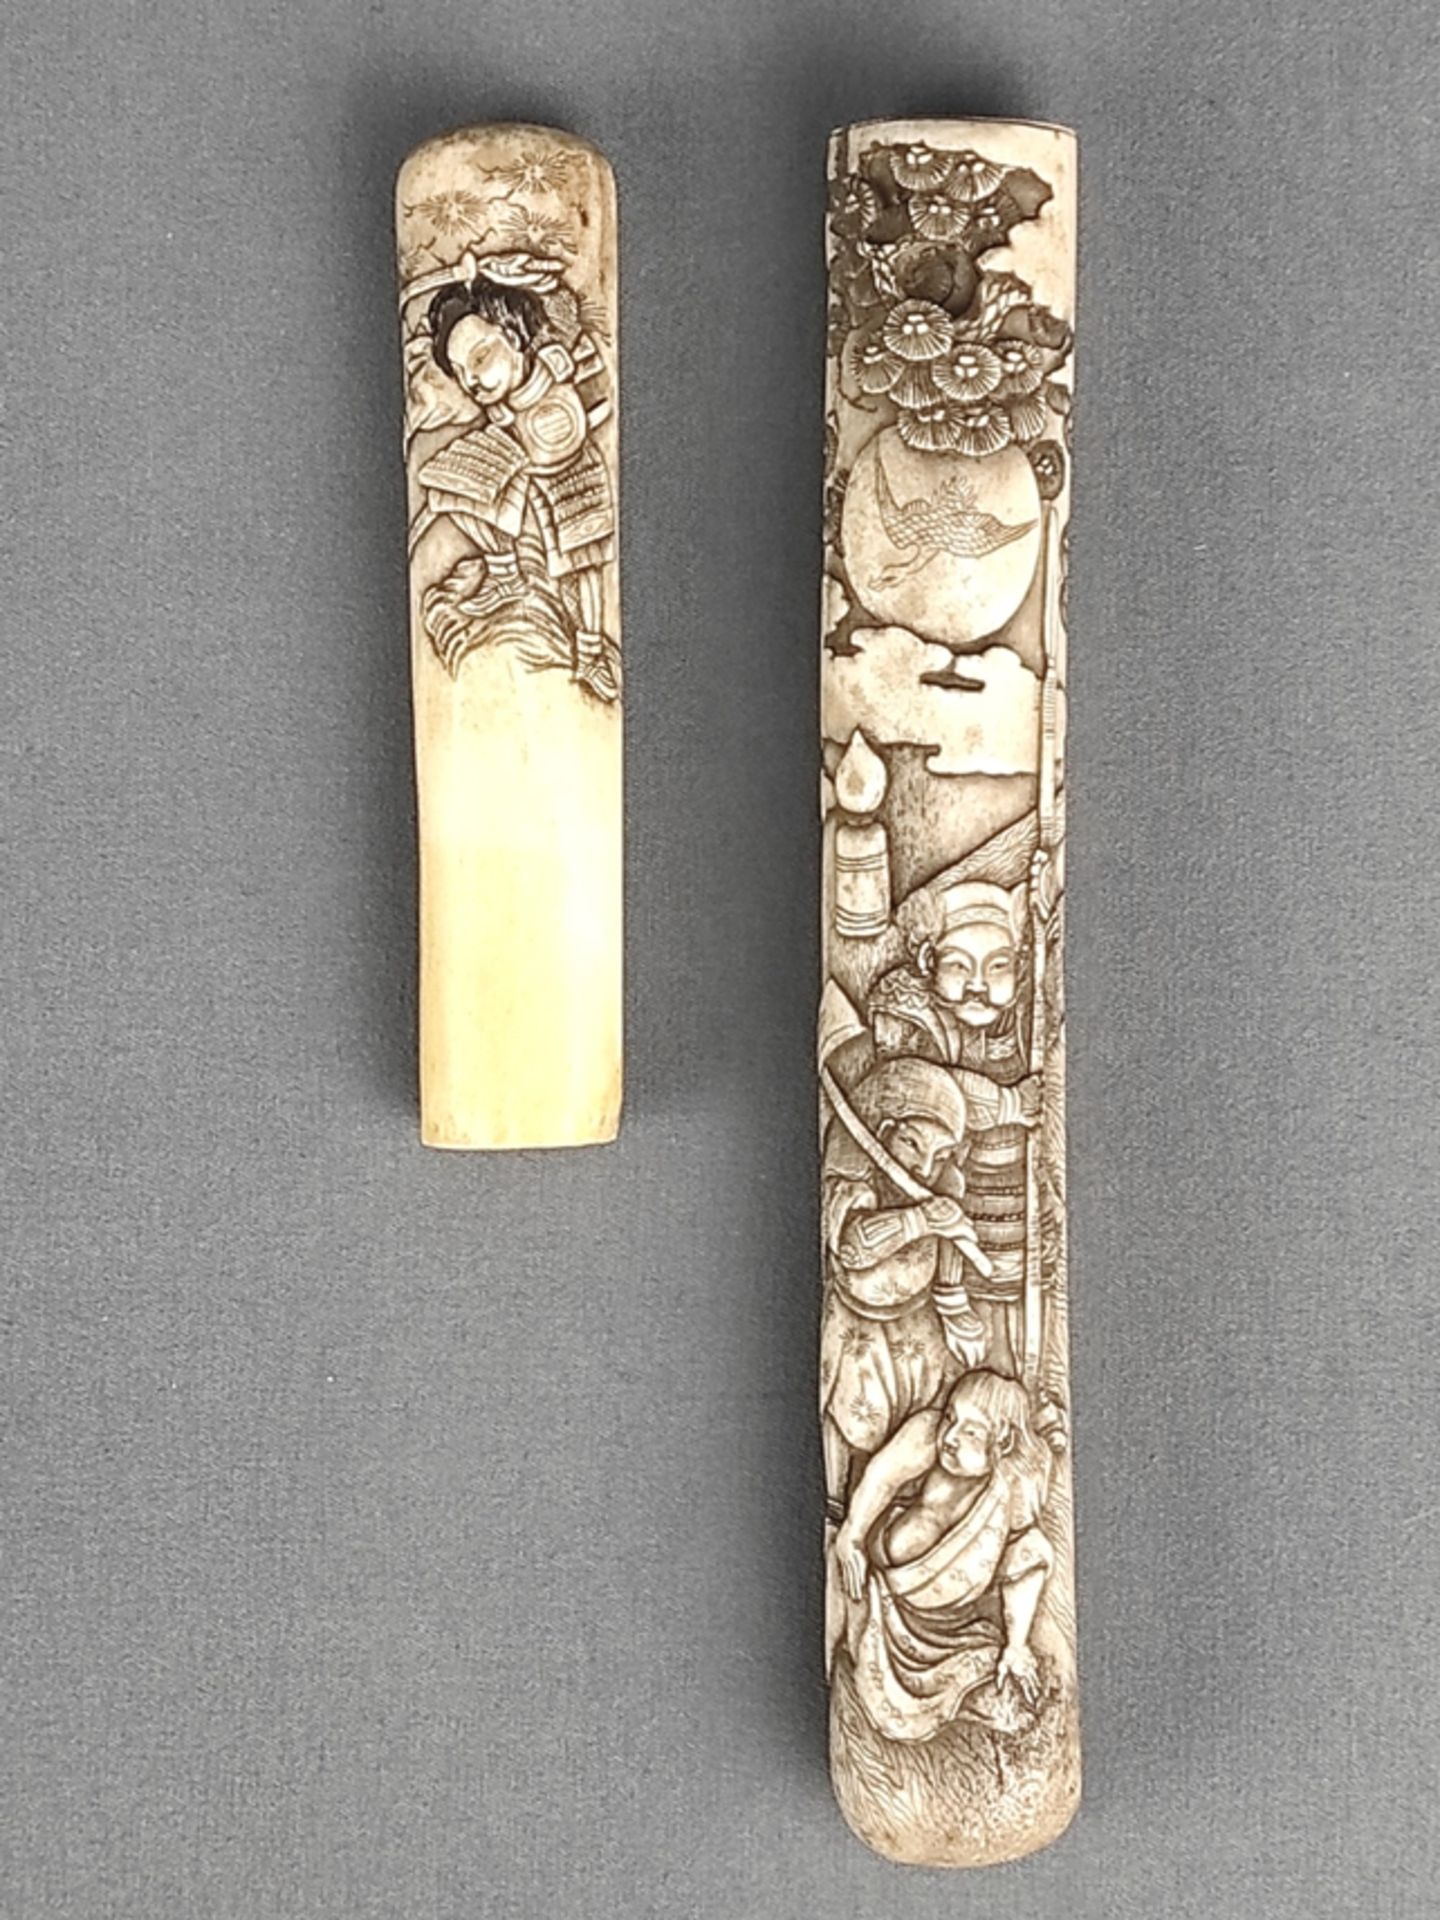 Knife sheath/case, probably Japan, with samurai depictions in relief in front of a landscape, consi - Image 2 of 2